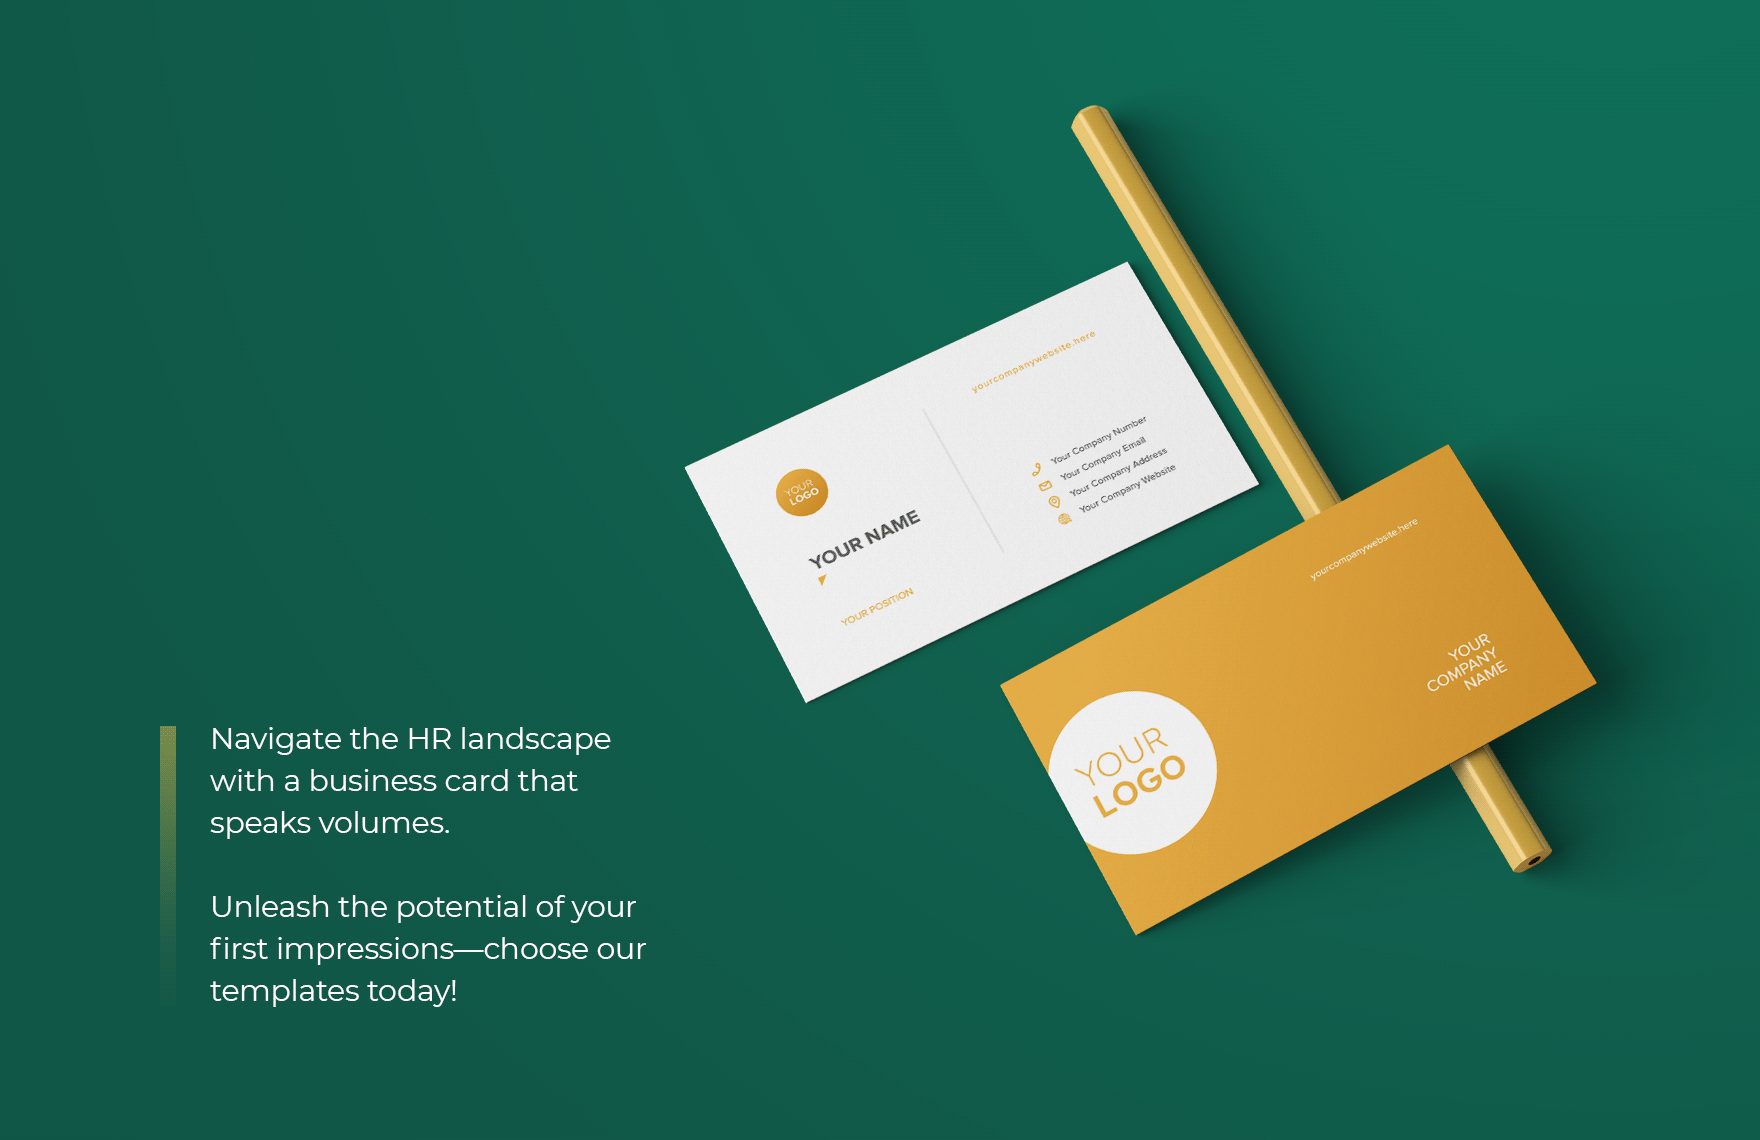 Supply Chain Manager Business Card Template